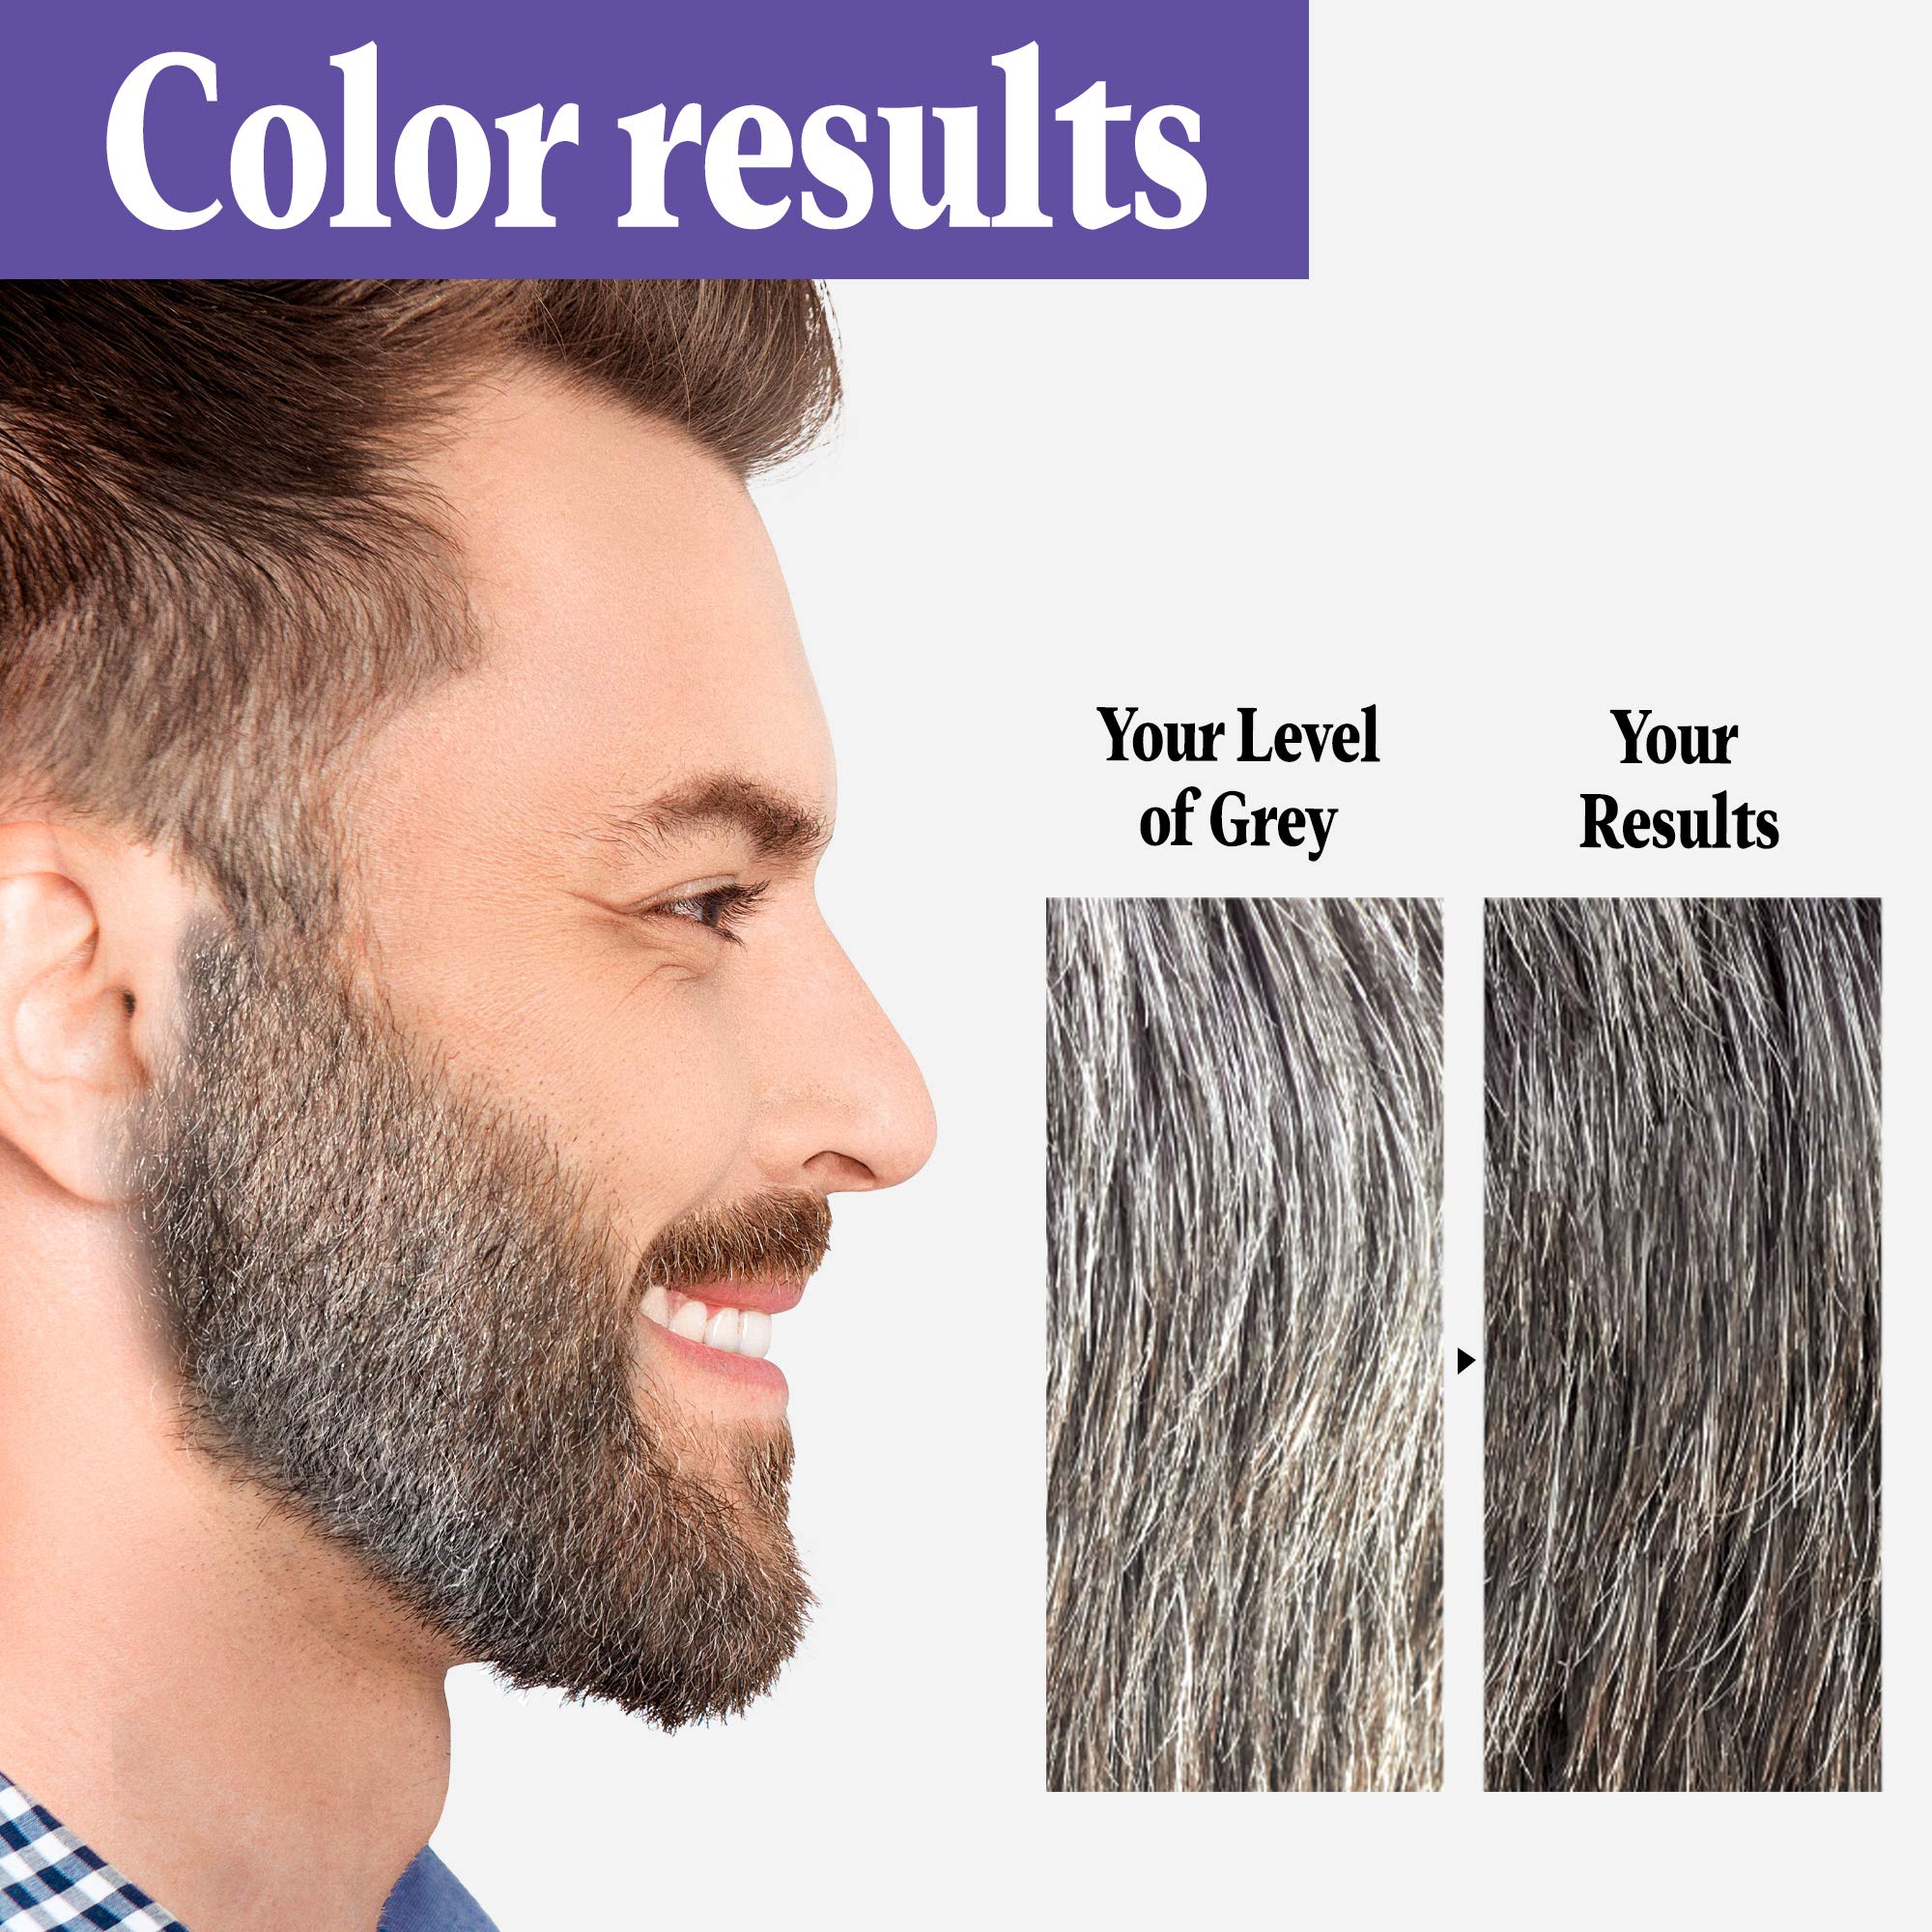 Just For Men Touch of Gray Mustache & Beard, Beard Coloring for Gray Hair with Brush Included for Easy Application, Great for a Salt and Pepper Look - Light & Medium Brown, B-25/35, Pack of 1